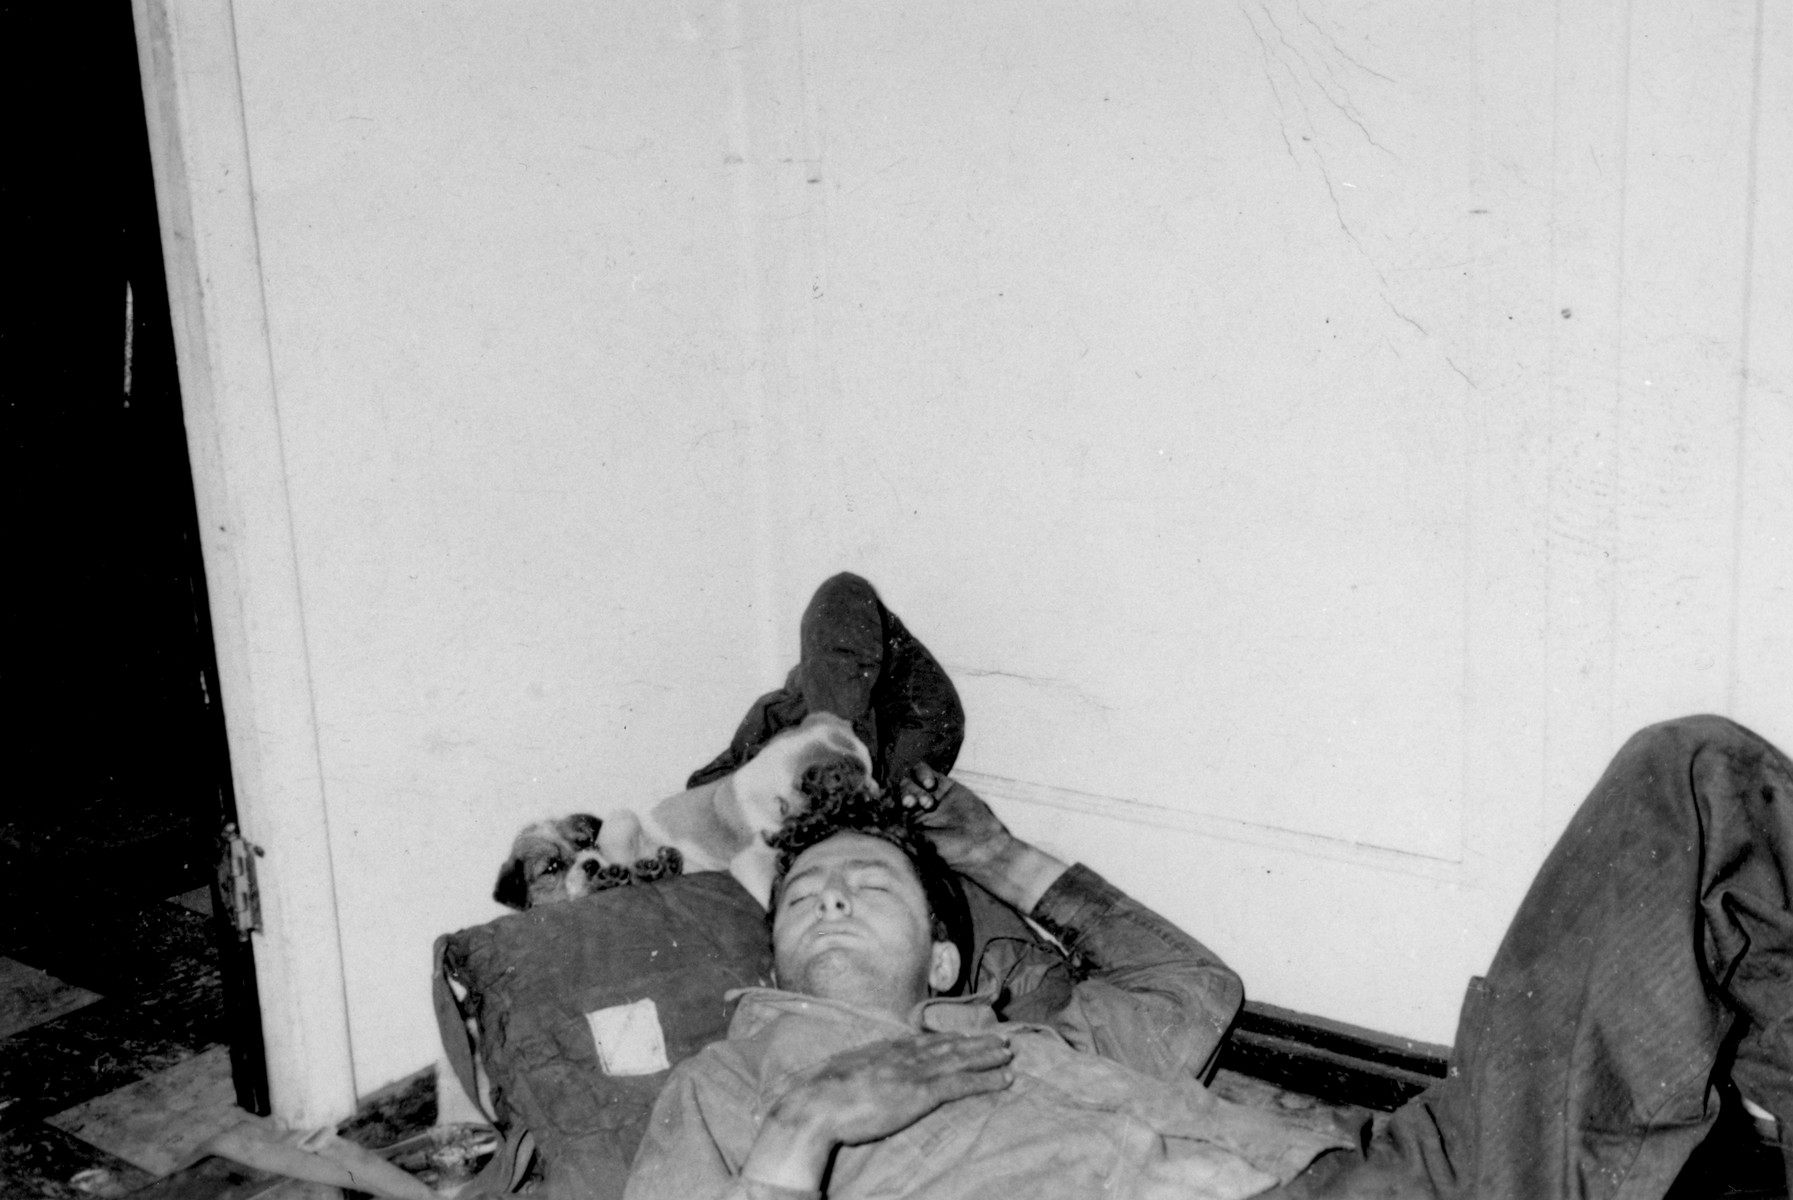 An exhausted crewman sleeps on the floor of a room on the President Warfield after the gale that nearly sank the ship during its first attempt to cross the Atlantic Ocean. 

The ships mascots, two puppies, are curled up near his head.